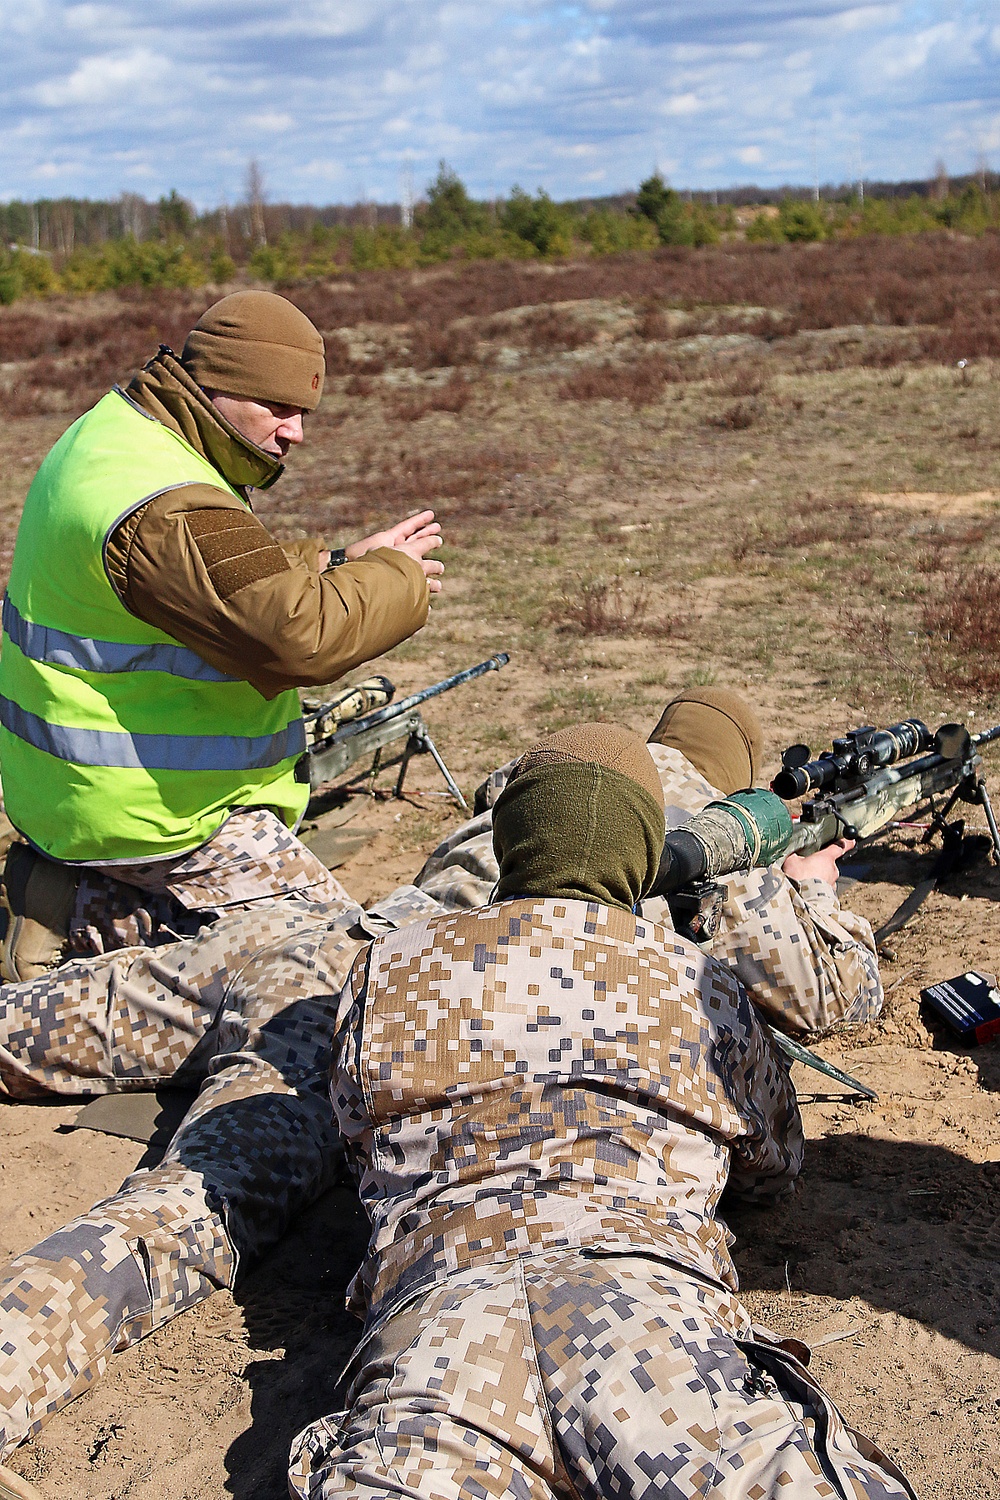 Snipers of five nations fire during Summer Shield XIII